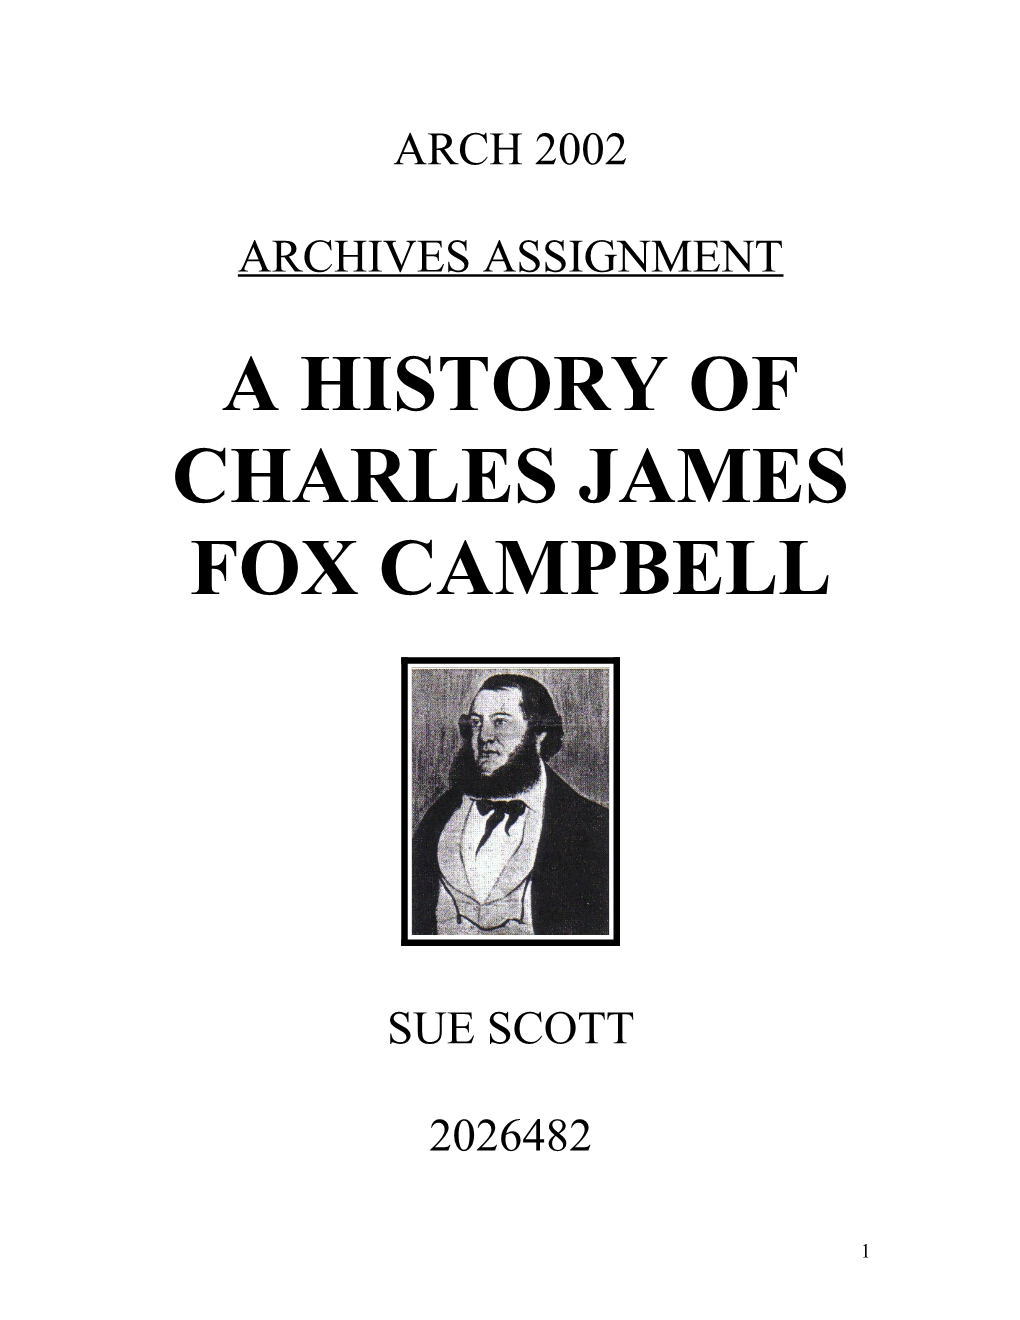 A History of Charles James Fox Campbell